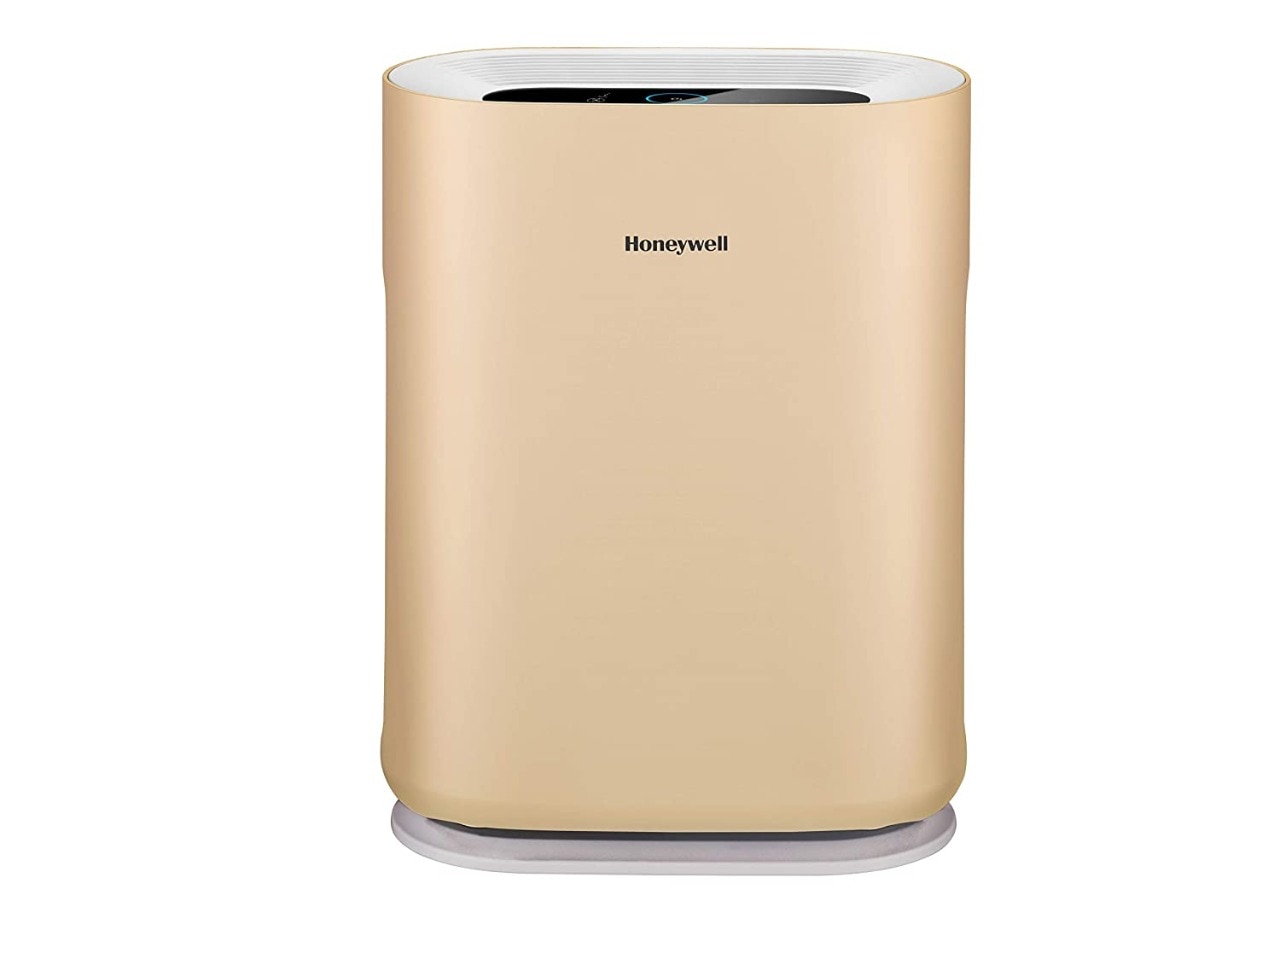 Amazon Festival Sale: Take care of your health this Diwali and buy air purifier for less than 10 thousand to keep the house virus and bacteria free